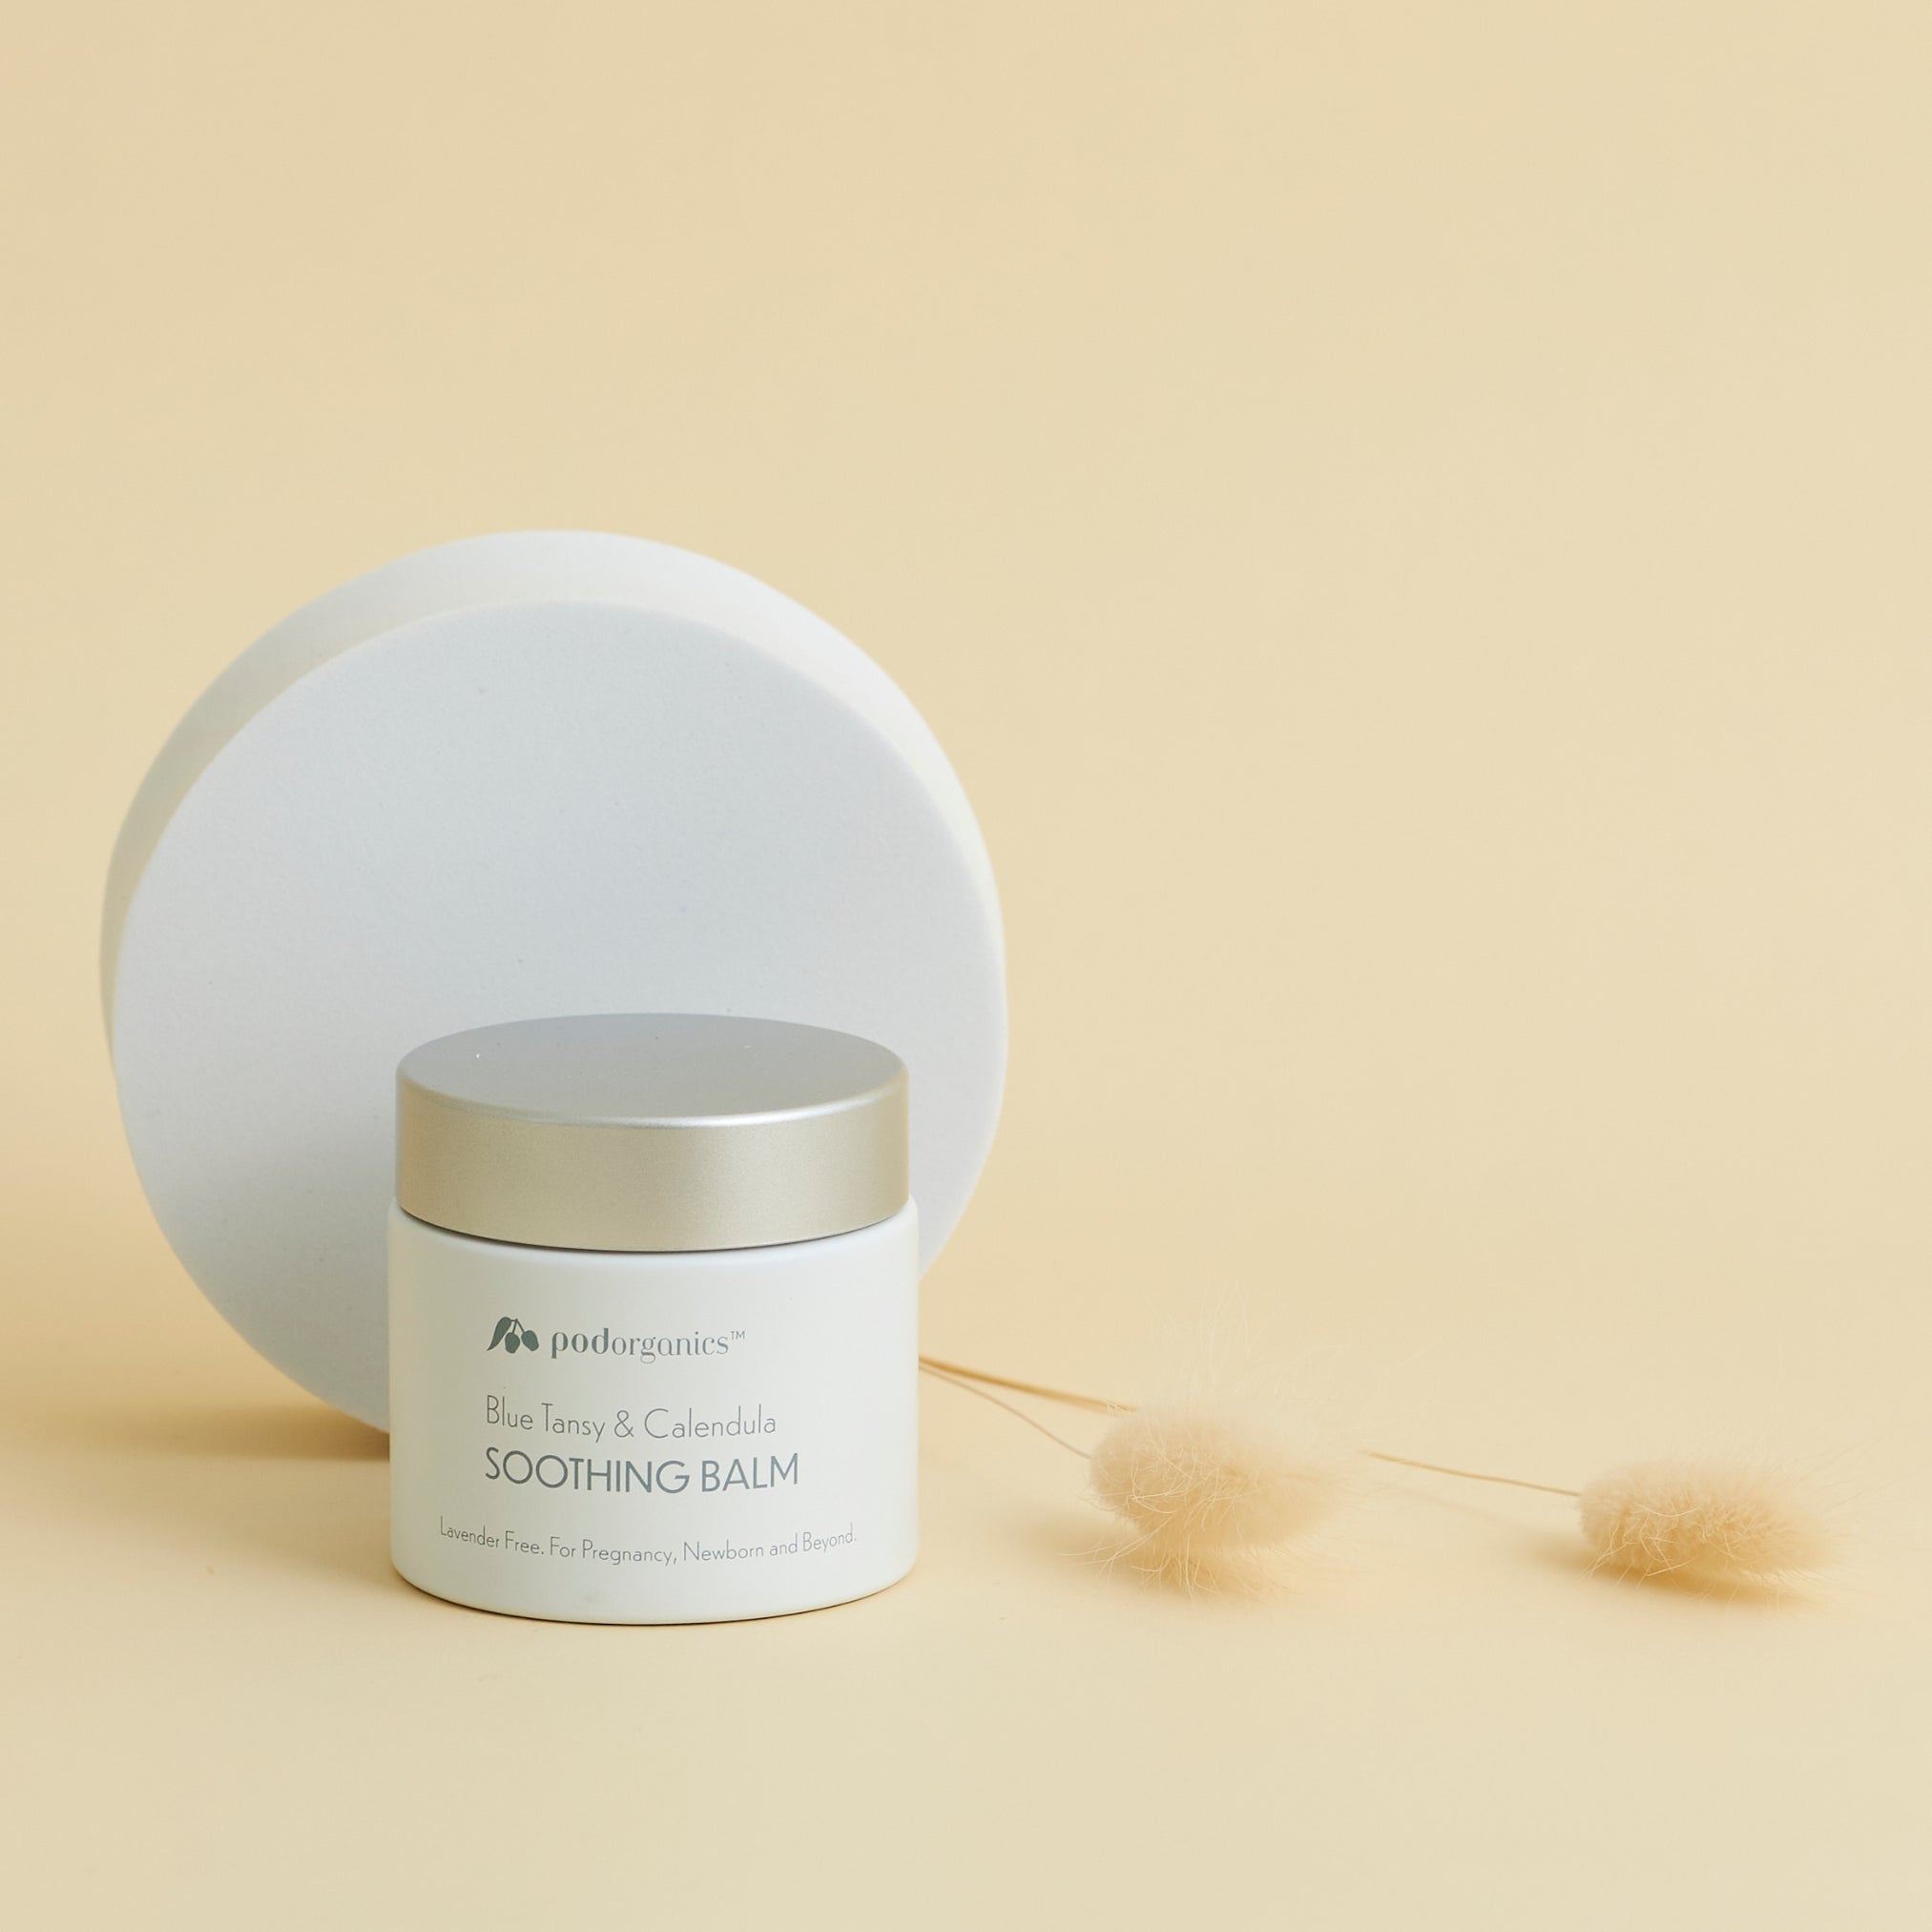 100% Organic deeply restorative multi-tasking balm that relieves dry, rough skin. Suitable for mild skin irritations including eczema, psoriasis and rosacea.